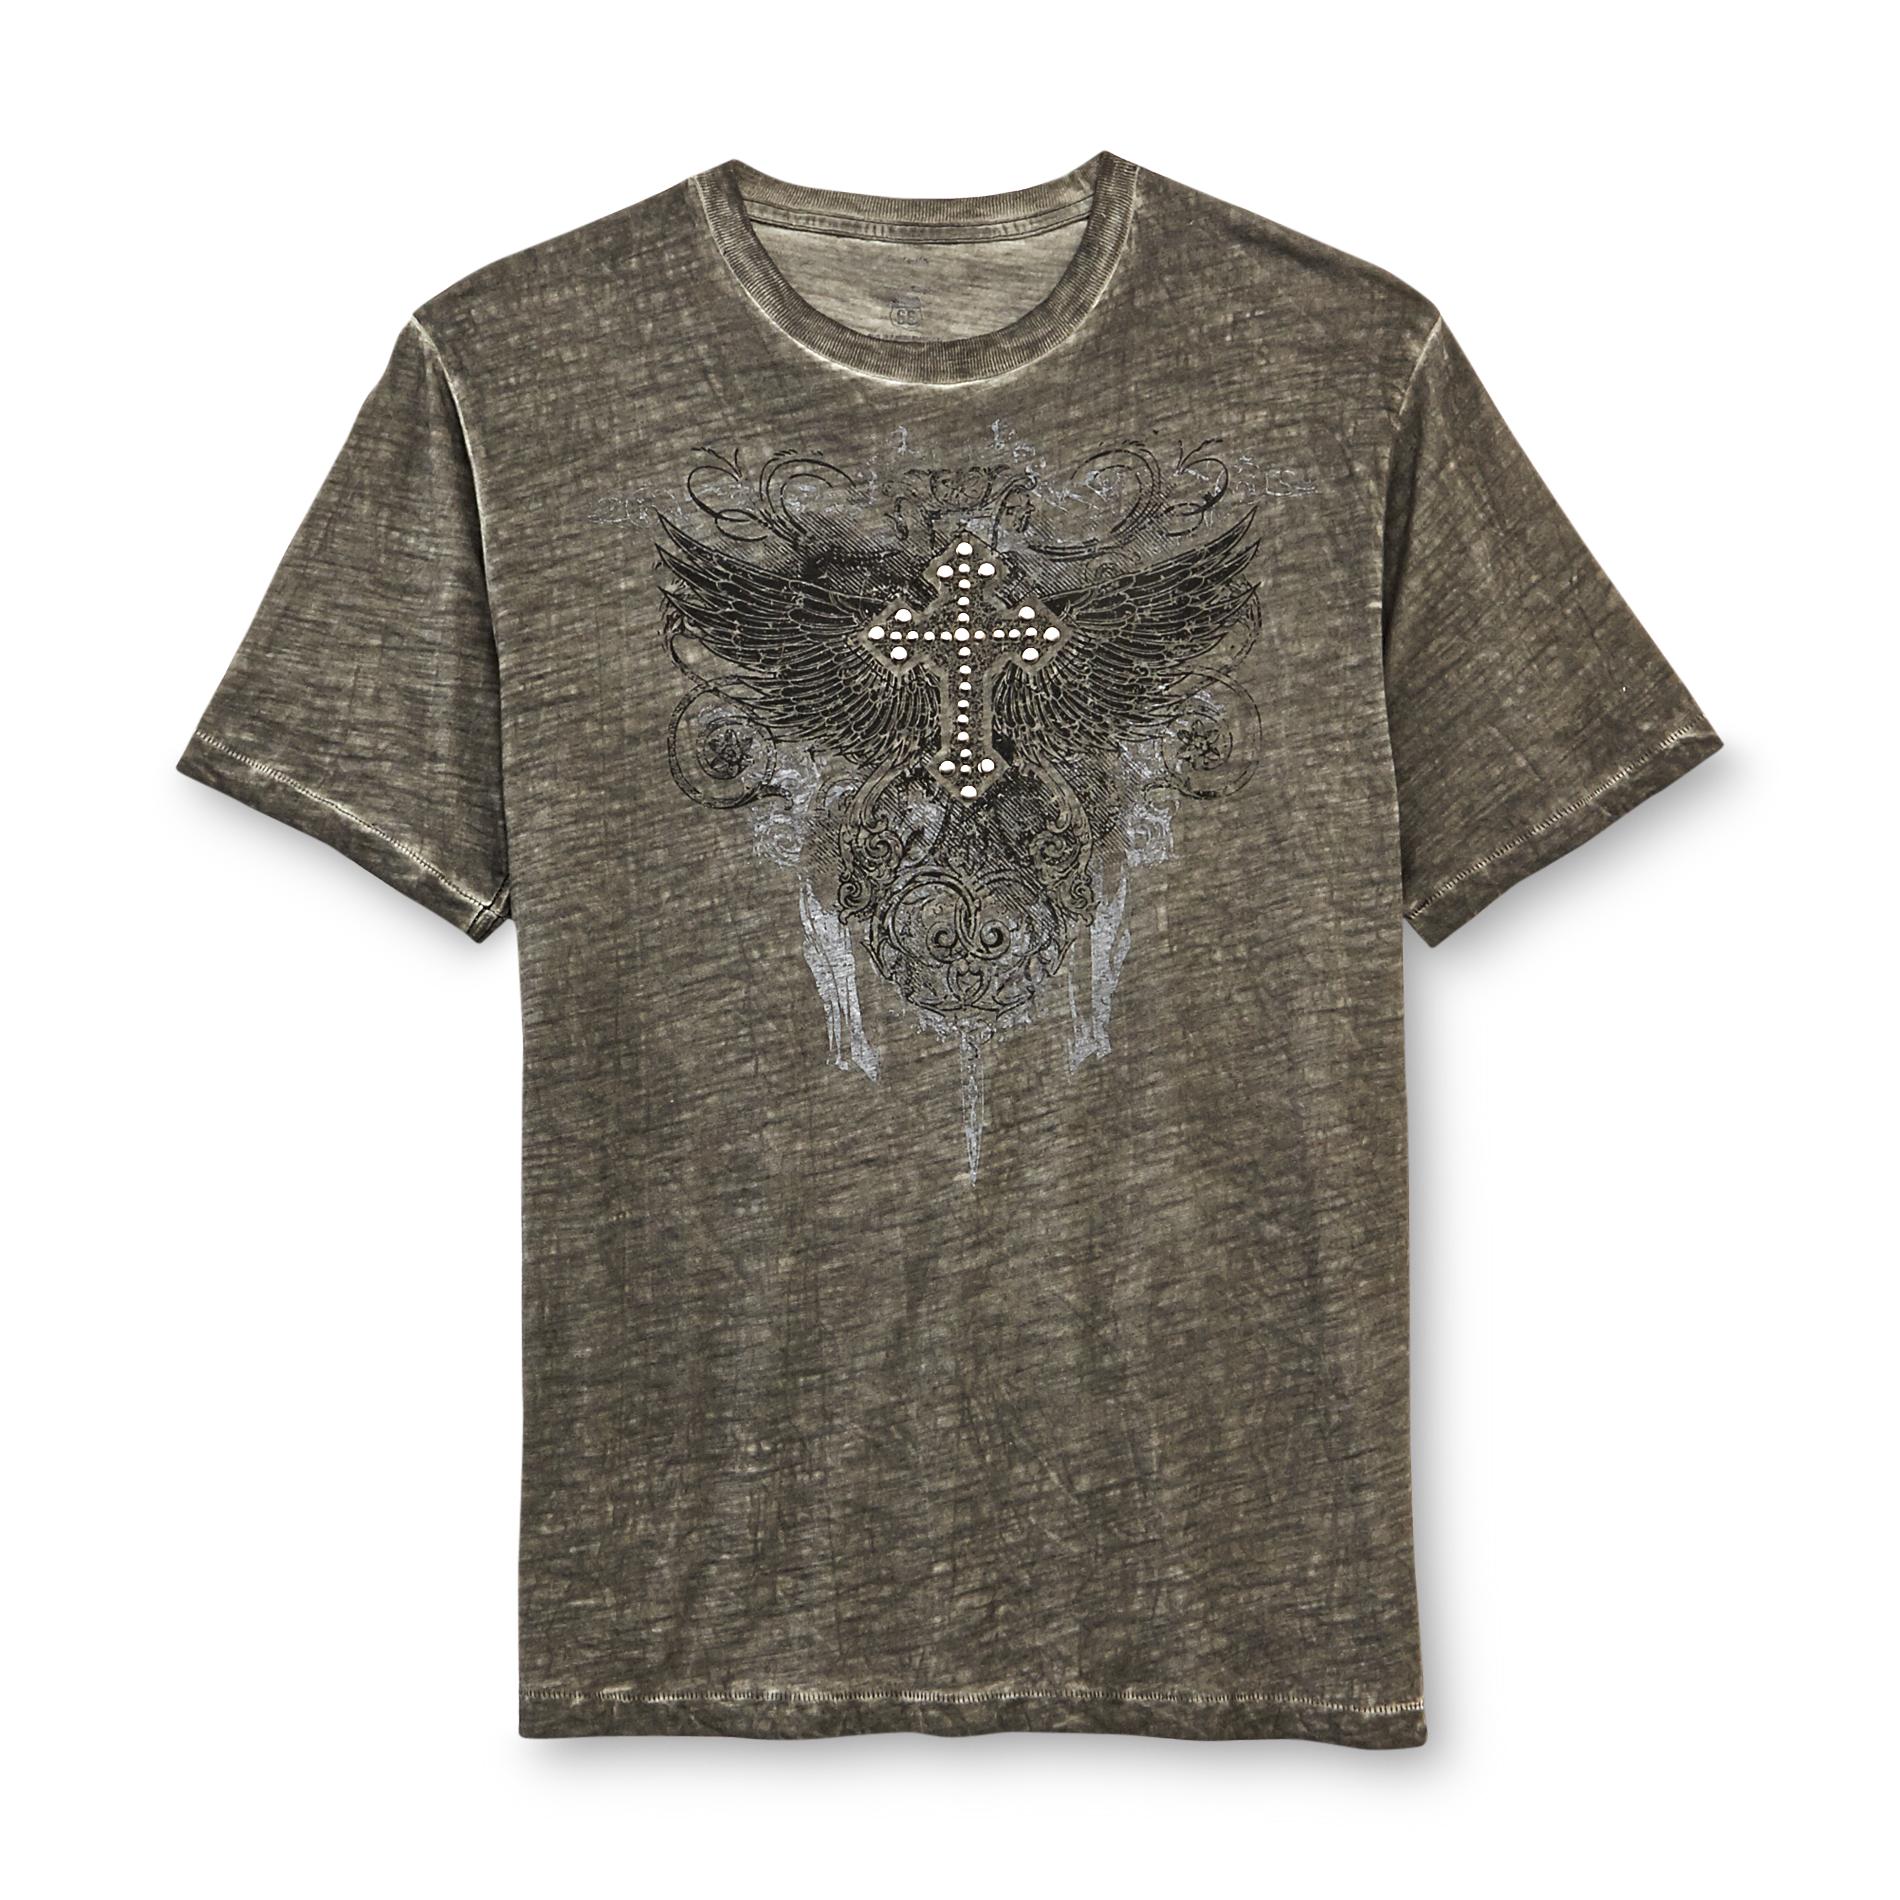 Route 66 Men's Graphic T-Shirt - Winged Cross